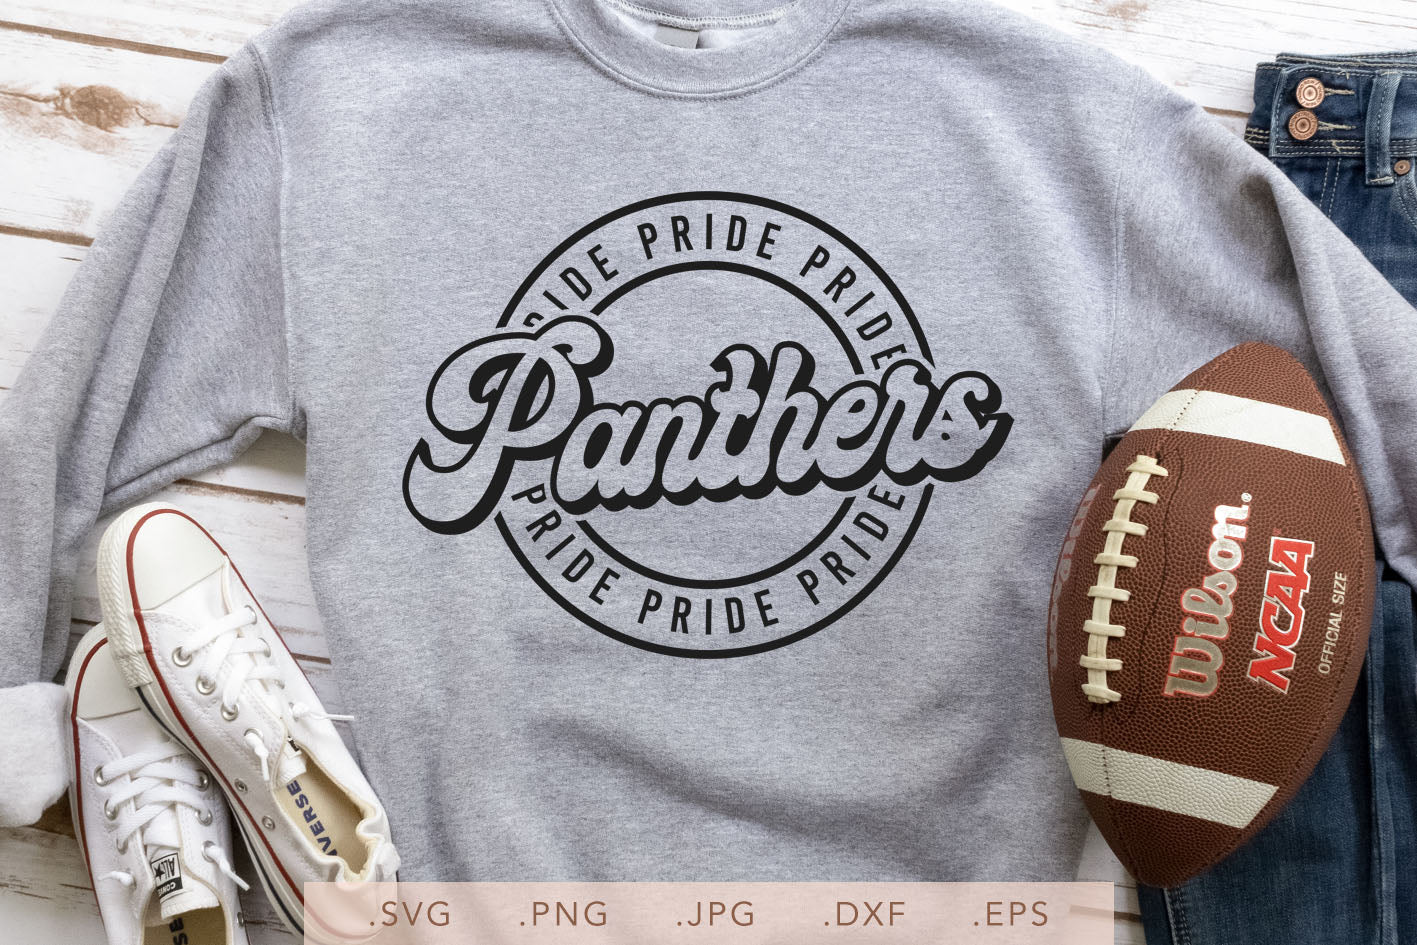 Panthers Retro Letters Sublimation Design Download PNG. Can Do 